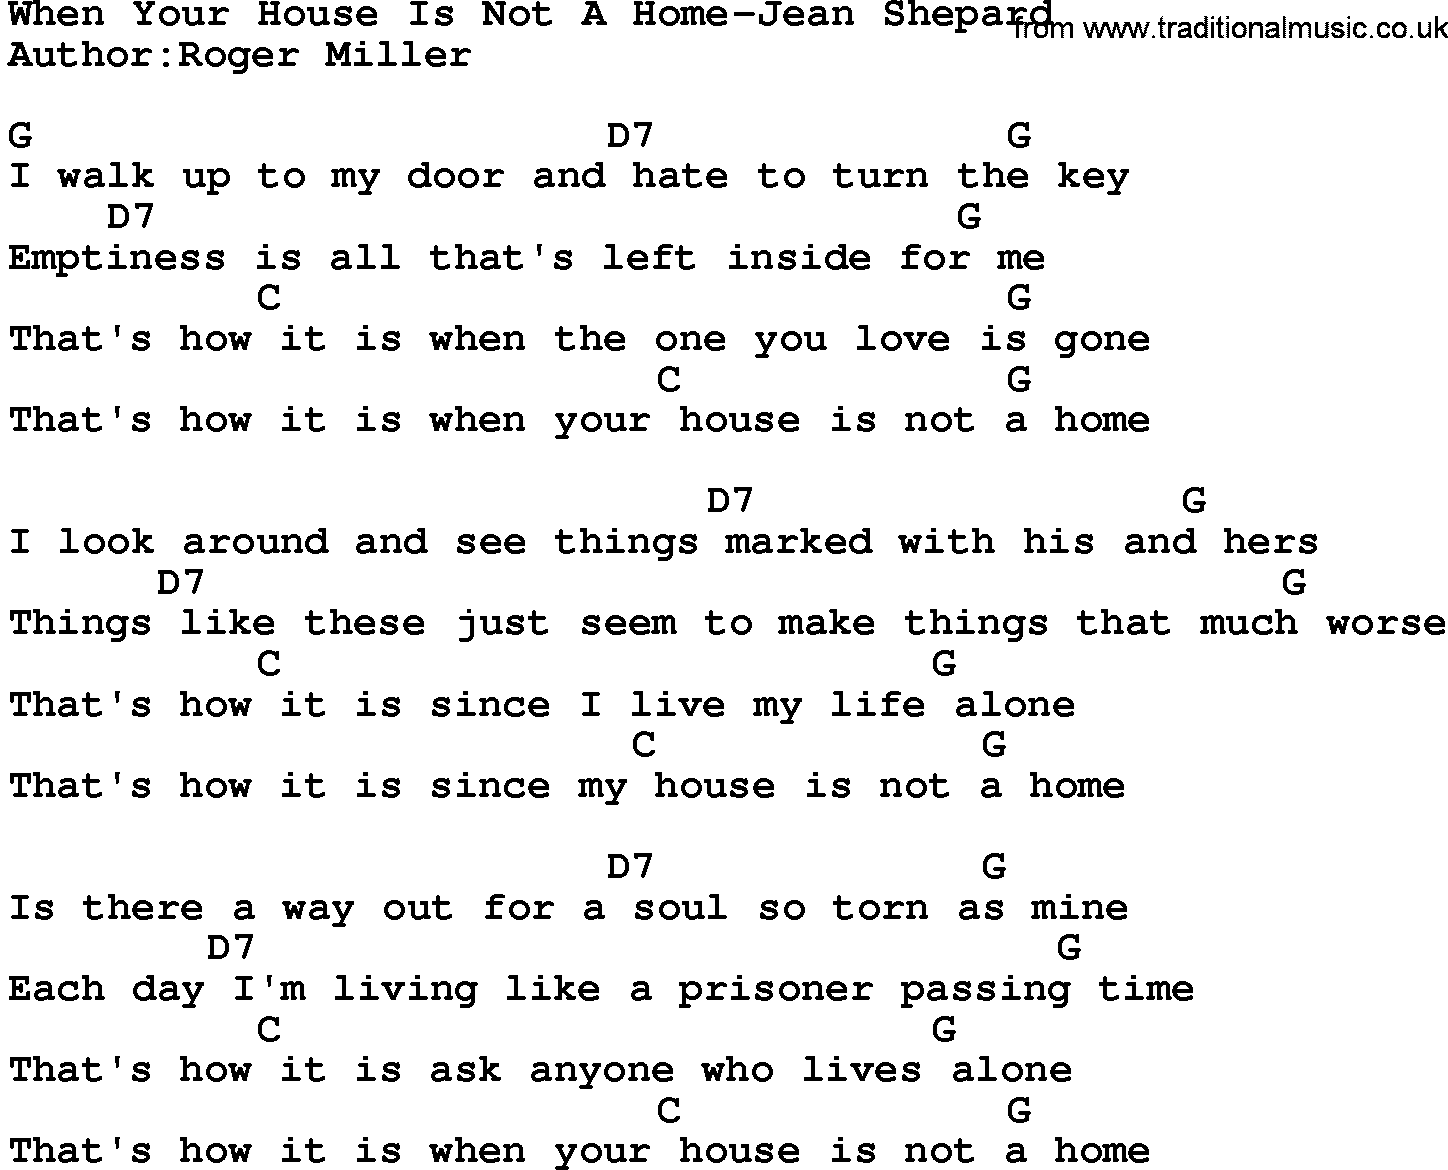 Country music song: When Your House Is Not A Home-Jean Shepard lyrics and chords